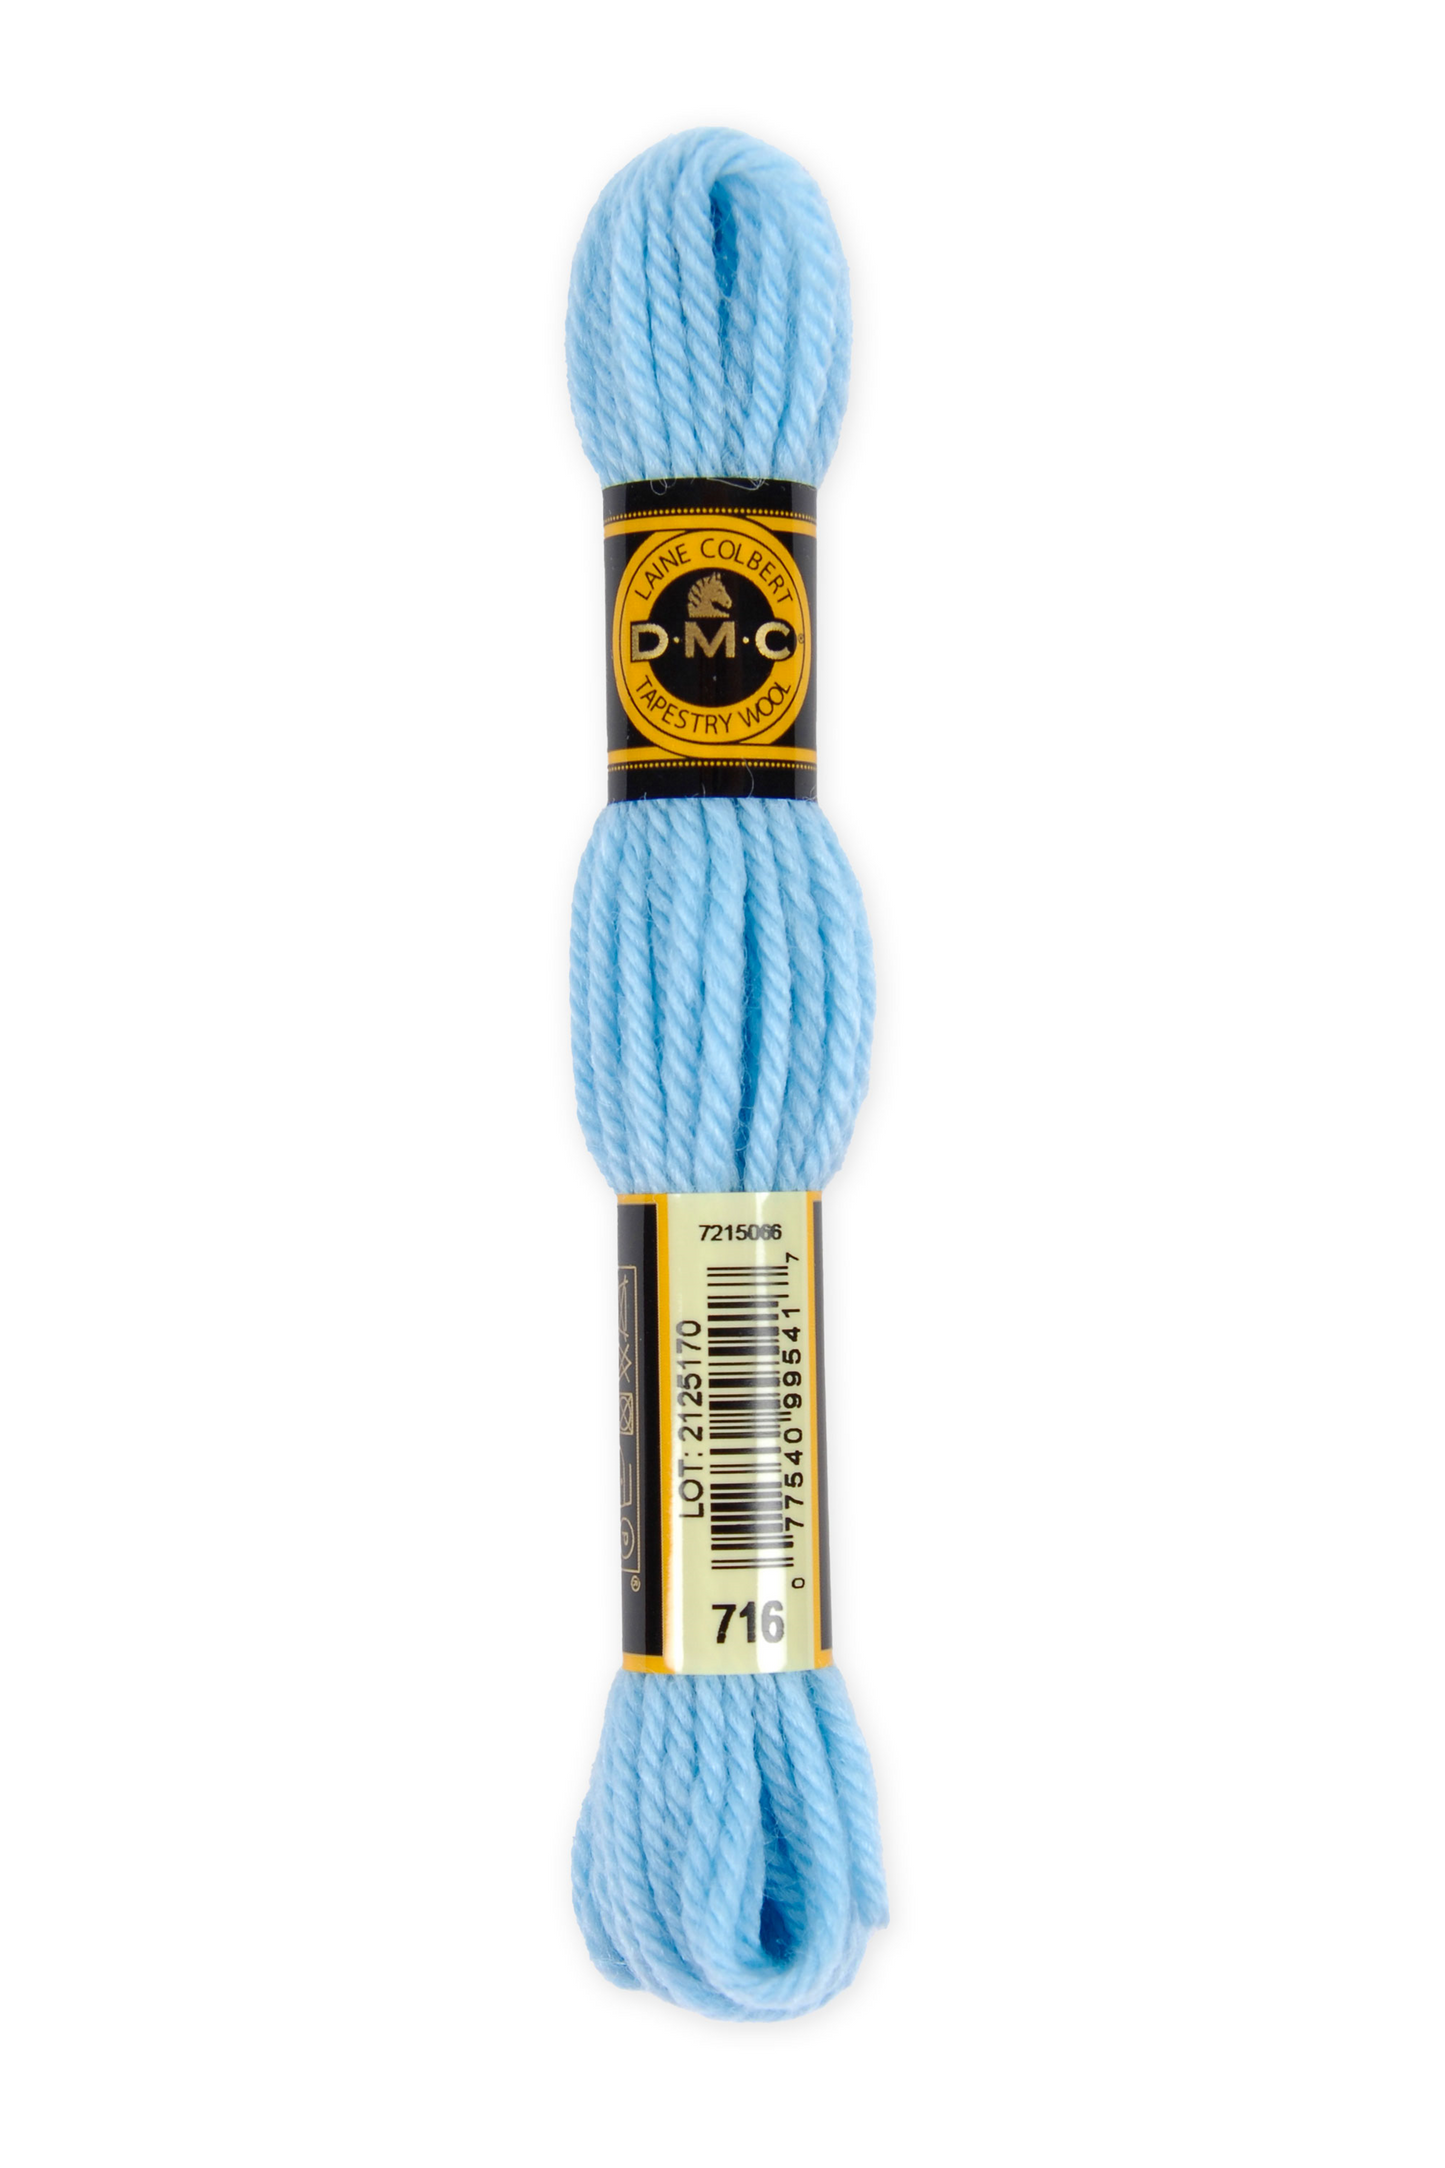 DMC TAPESTRY WOOLS - New colours